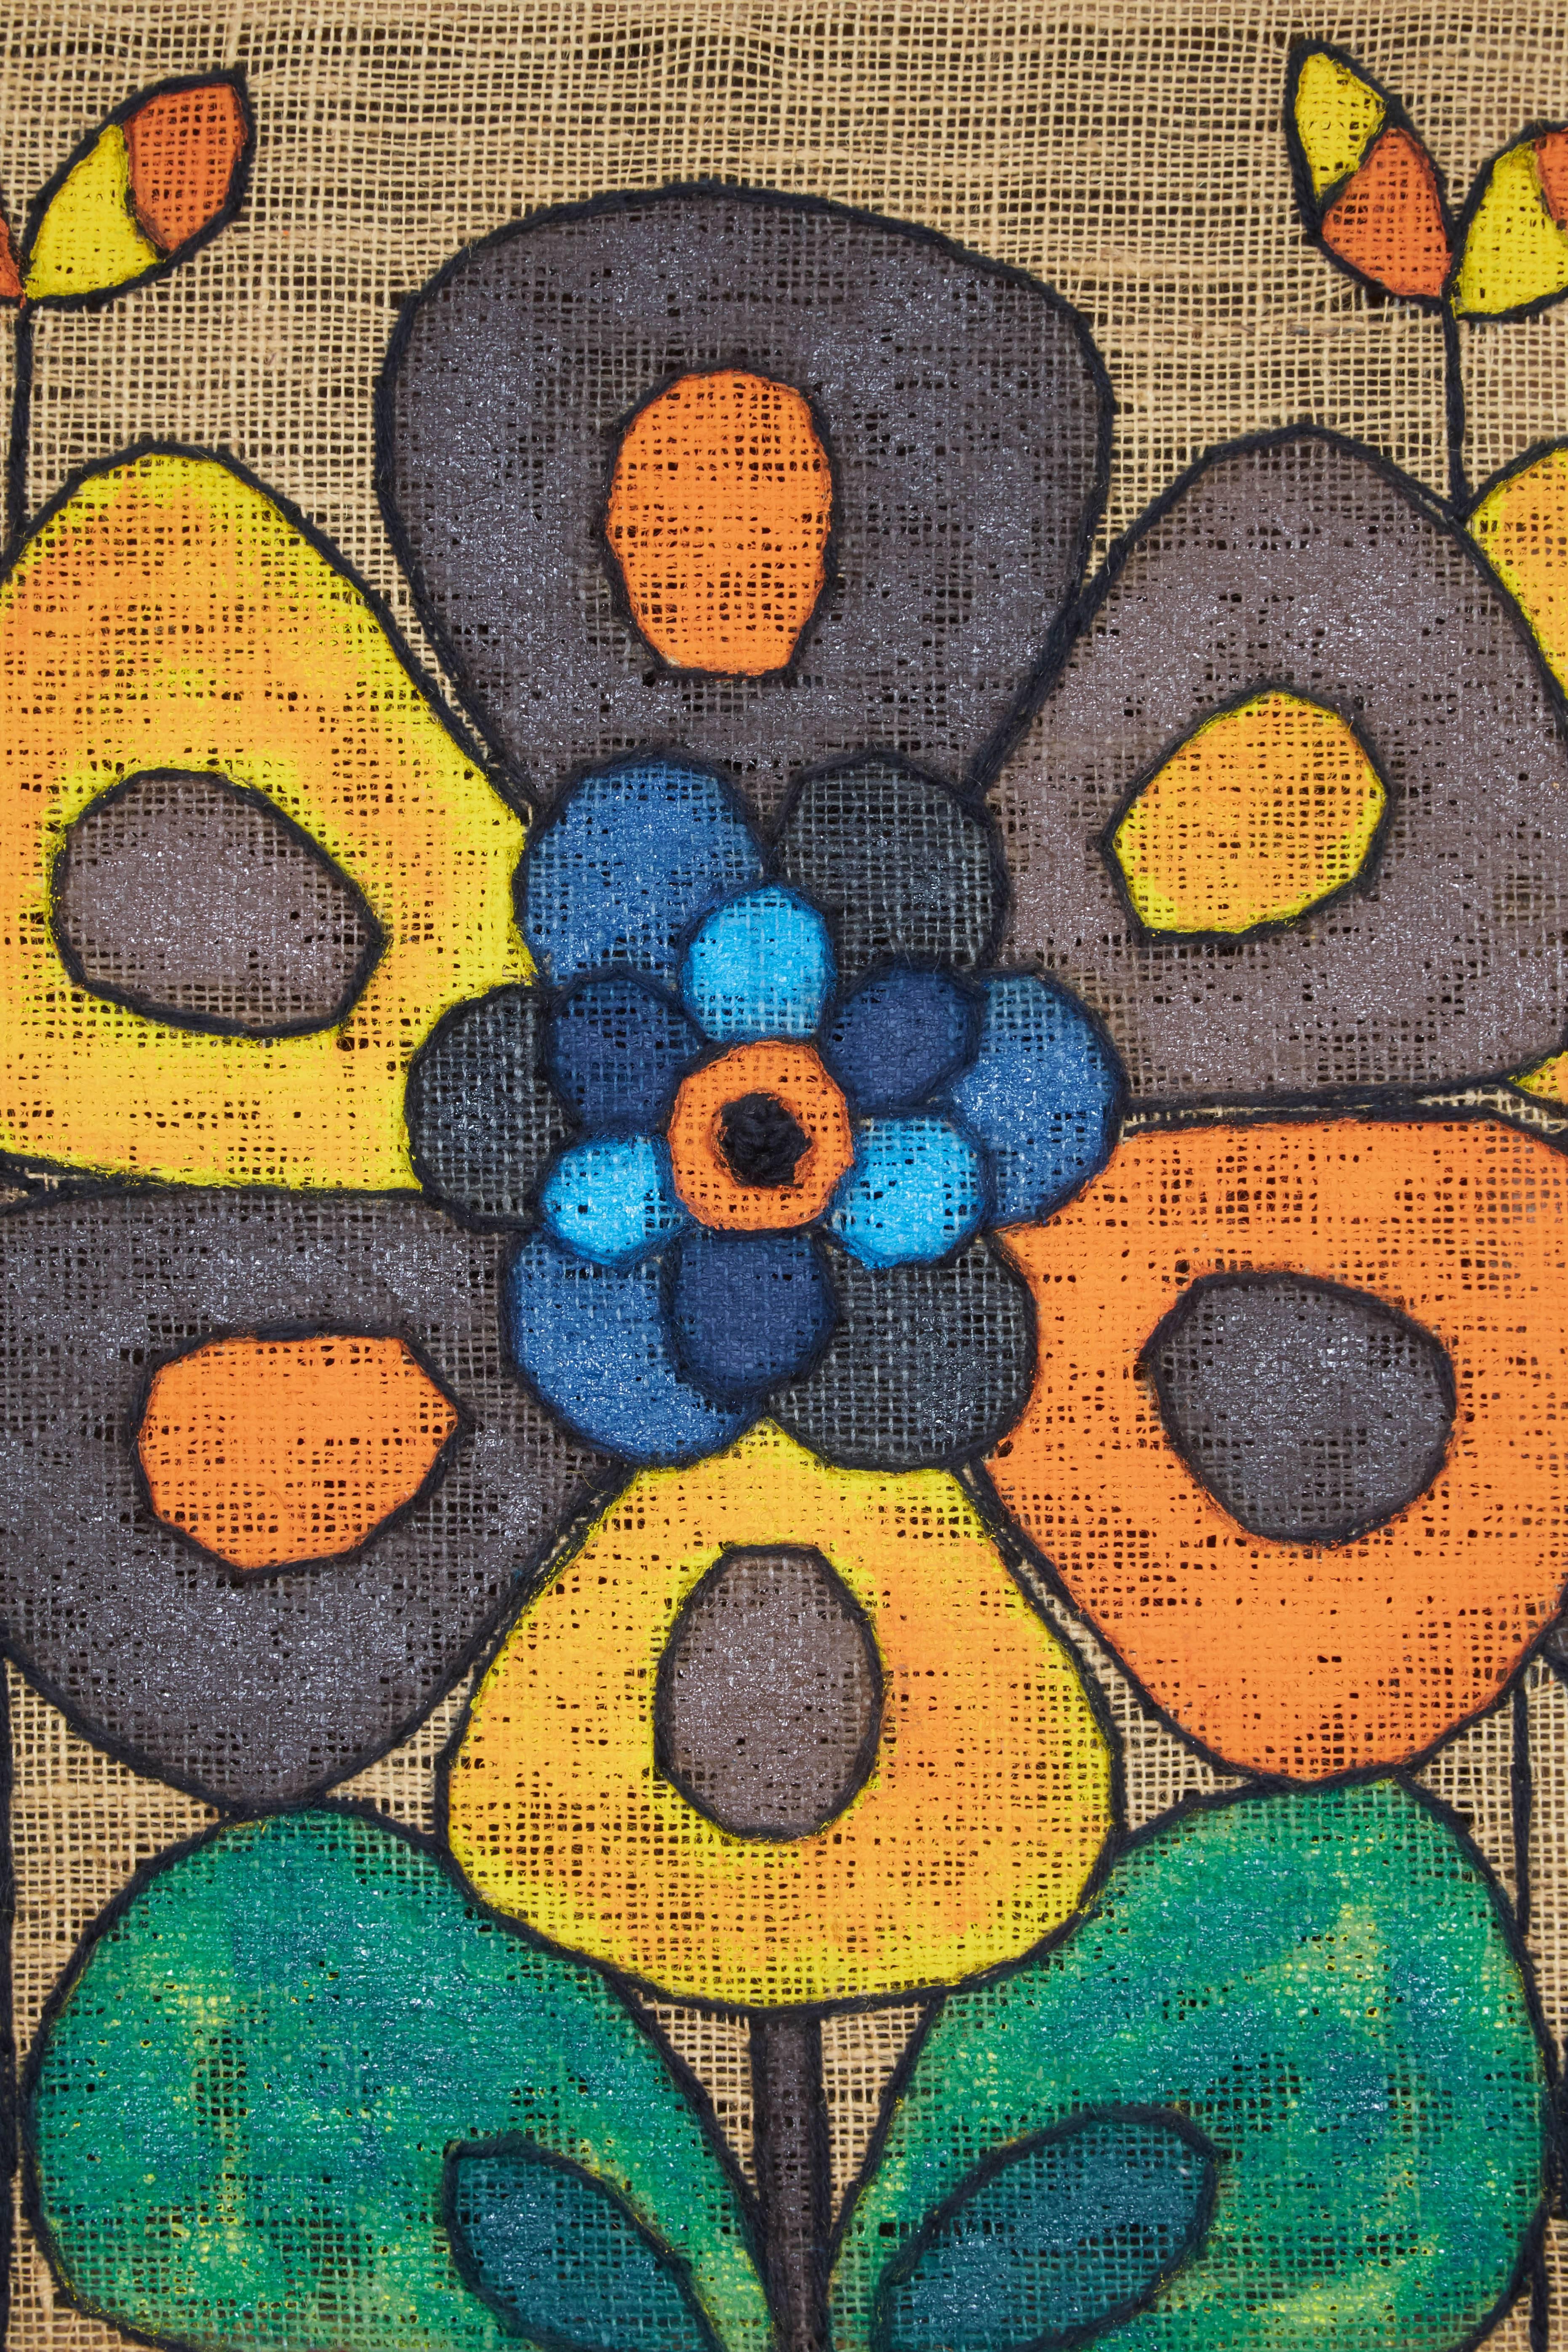 Vintage 1960s Danish Wall Art Painting

This mid century flower power oil painting on burlap has a wood frame, and is easy to hang. An awesome piece of Danish retro art. Ready for pick up delivery, or shipping anywhere in the world.